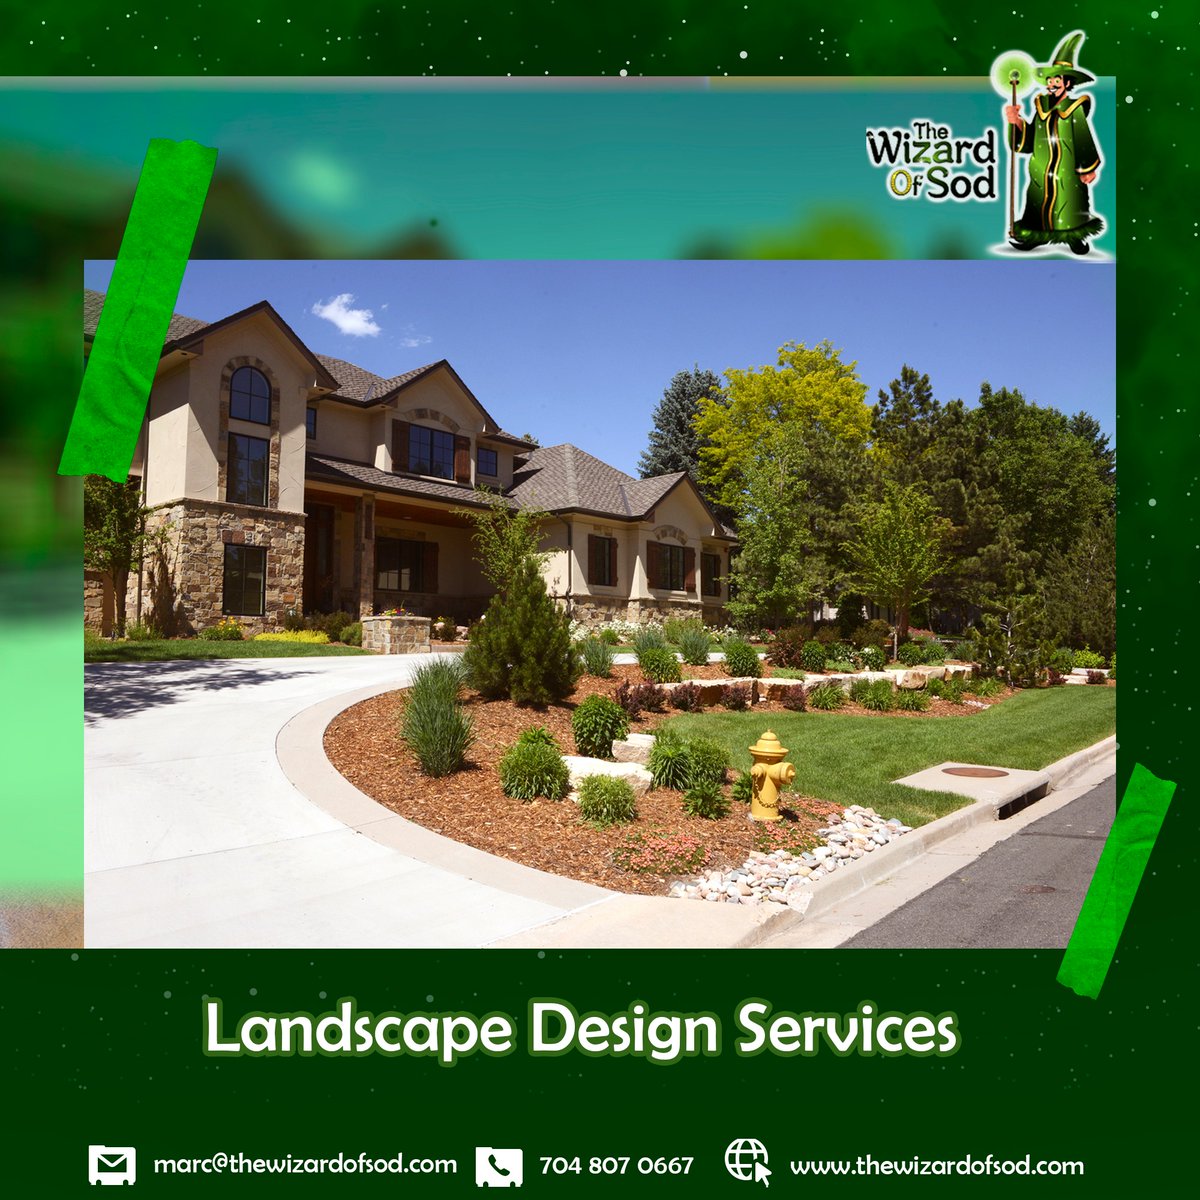 For landscape design services, Give us a call now:𝟳𝟬𝟰 𝟴𝟬𝟳 𝟬𝟲𝟲𝟳

#LandscapingDesign #OutdoorDesign #LandscapingIdeas #HomeExterior #OutdoorLiving #LandscapingCompany #CommercialLandscaping #ResidentialLandscaping #BeautifulLandscapes #GreenSpaces